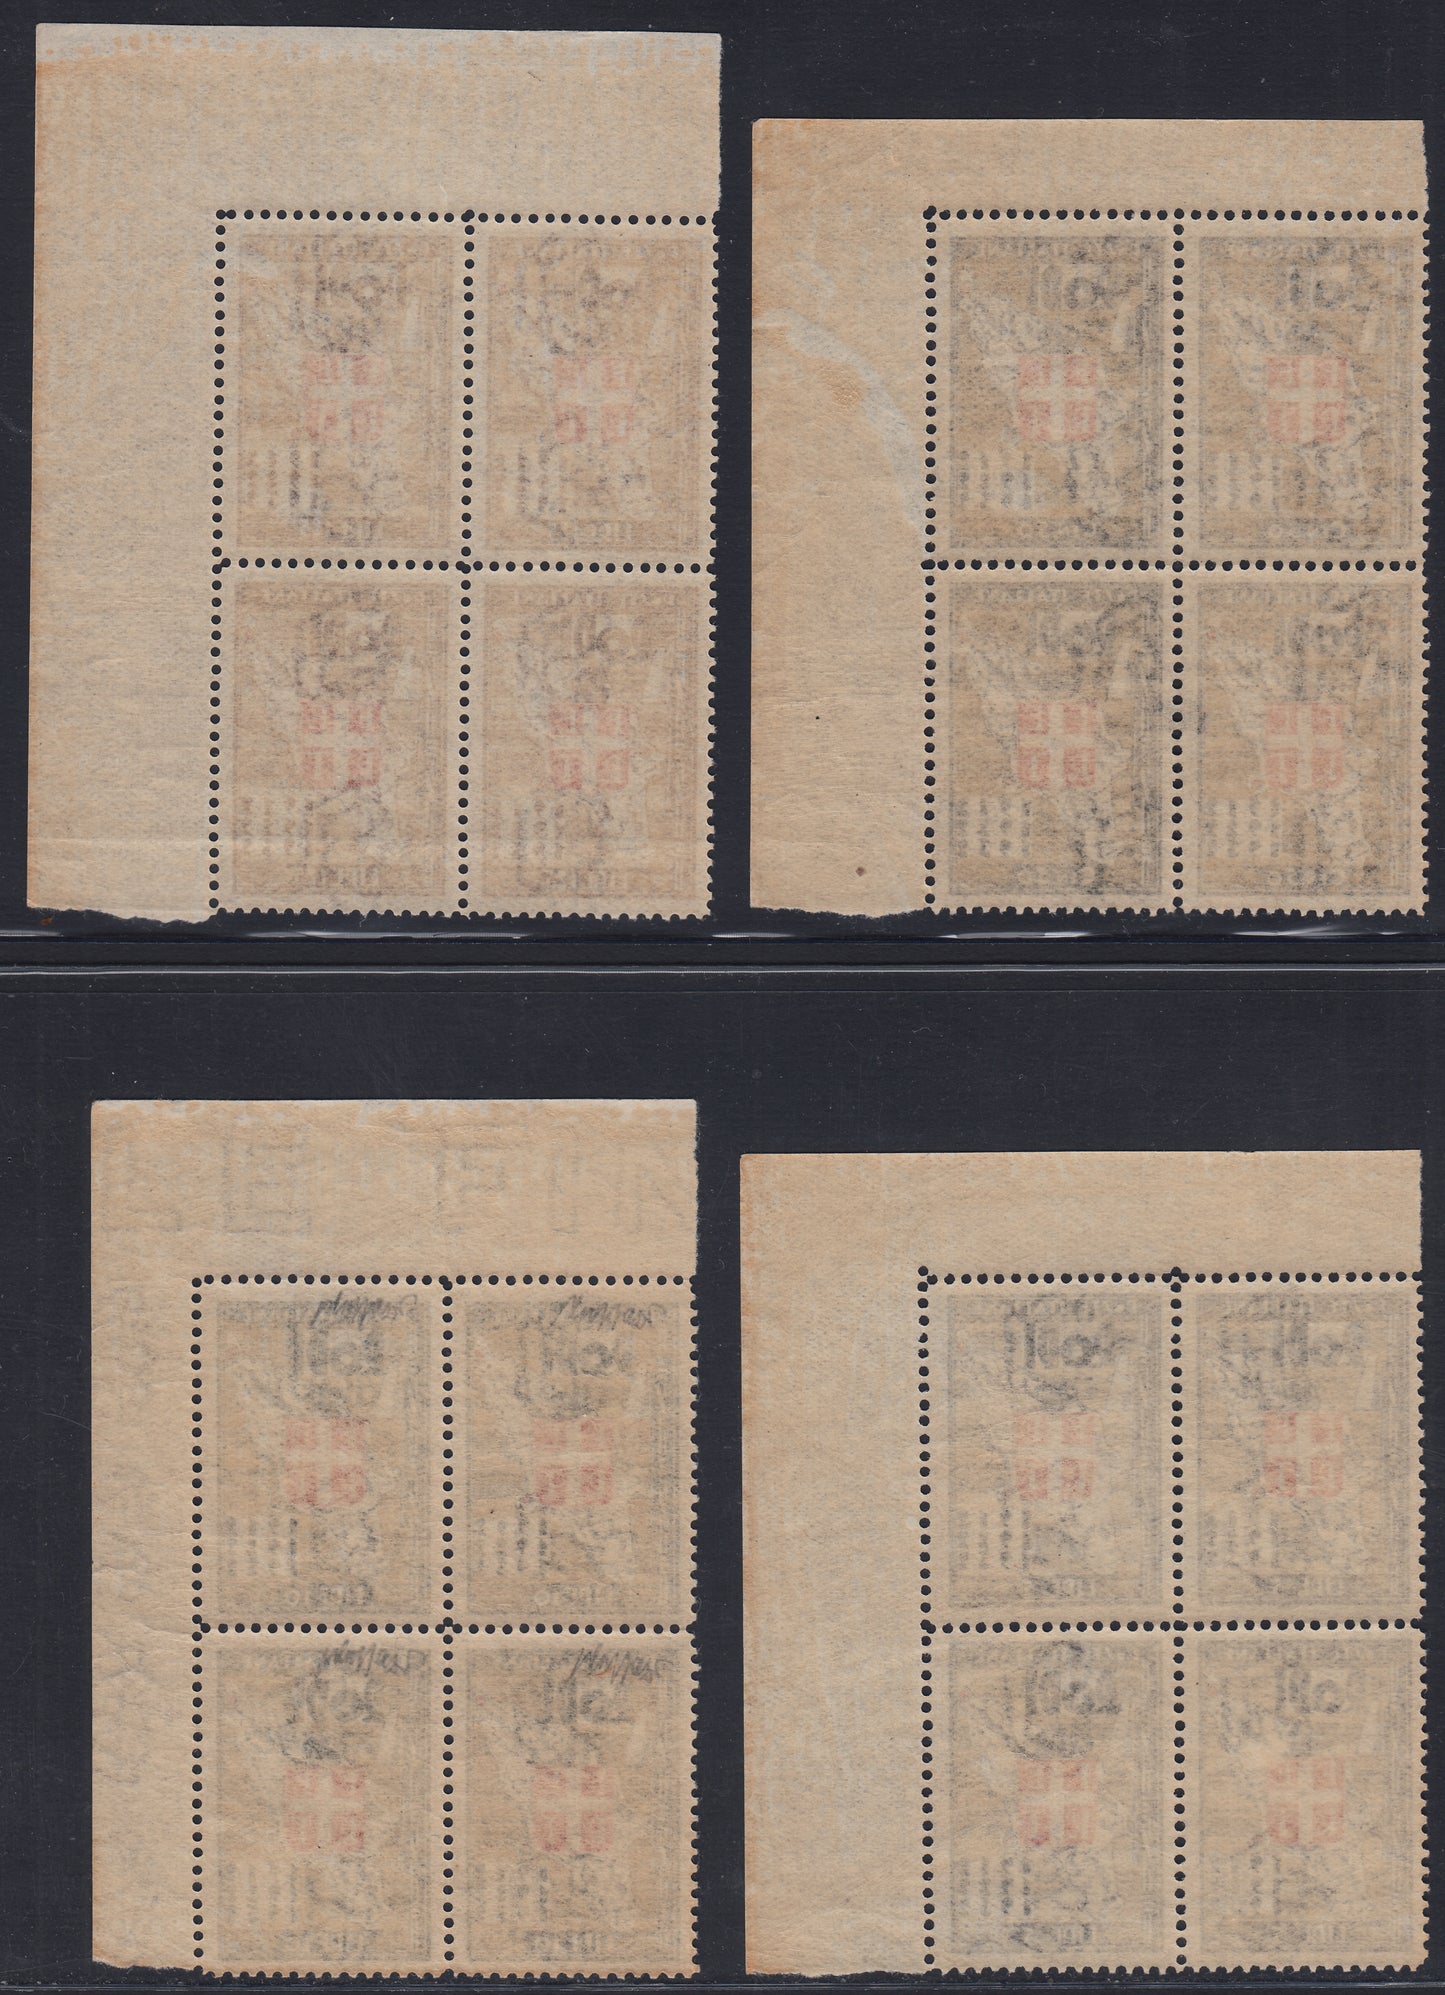 Egeo30 - 1932 - Egeo, twentieth anniversary of the occupation and tenth anniversary of the fascist revolution, series of 9 values ​​in blocks of 4 new ones with intact rubber, spectacular! (65/63) 